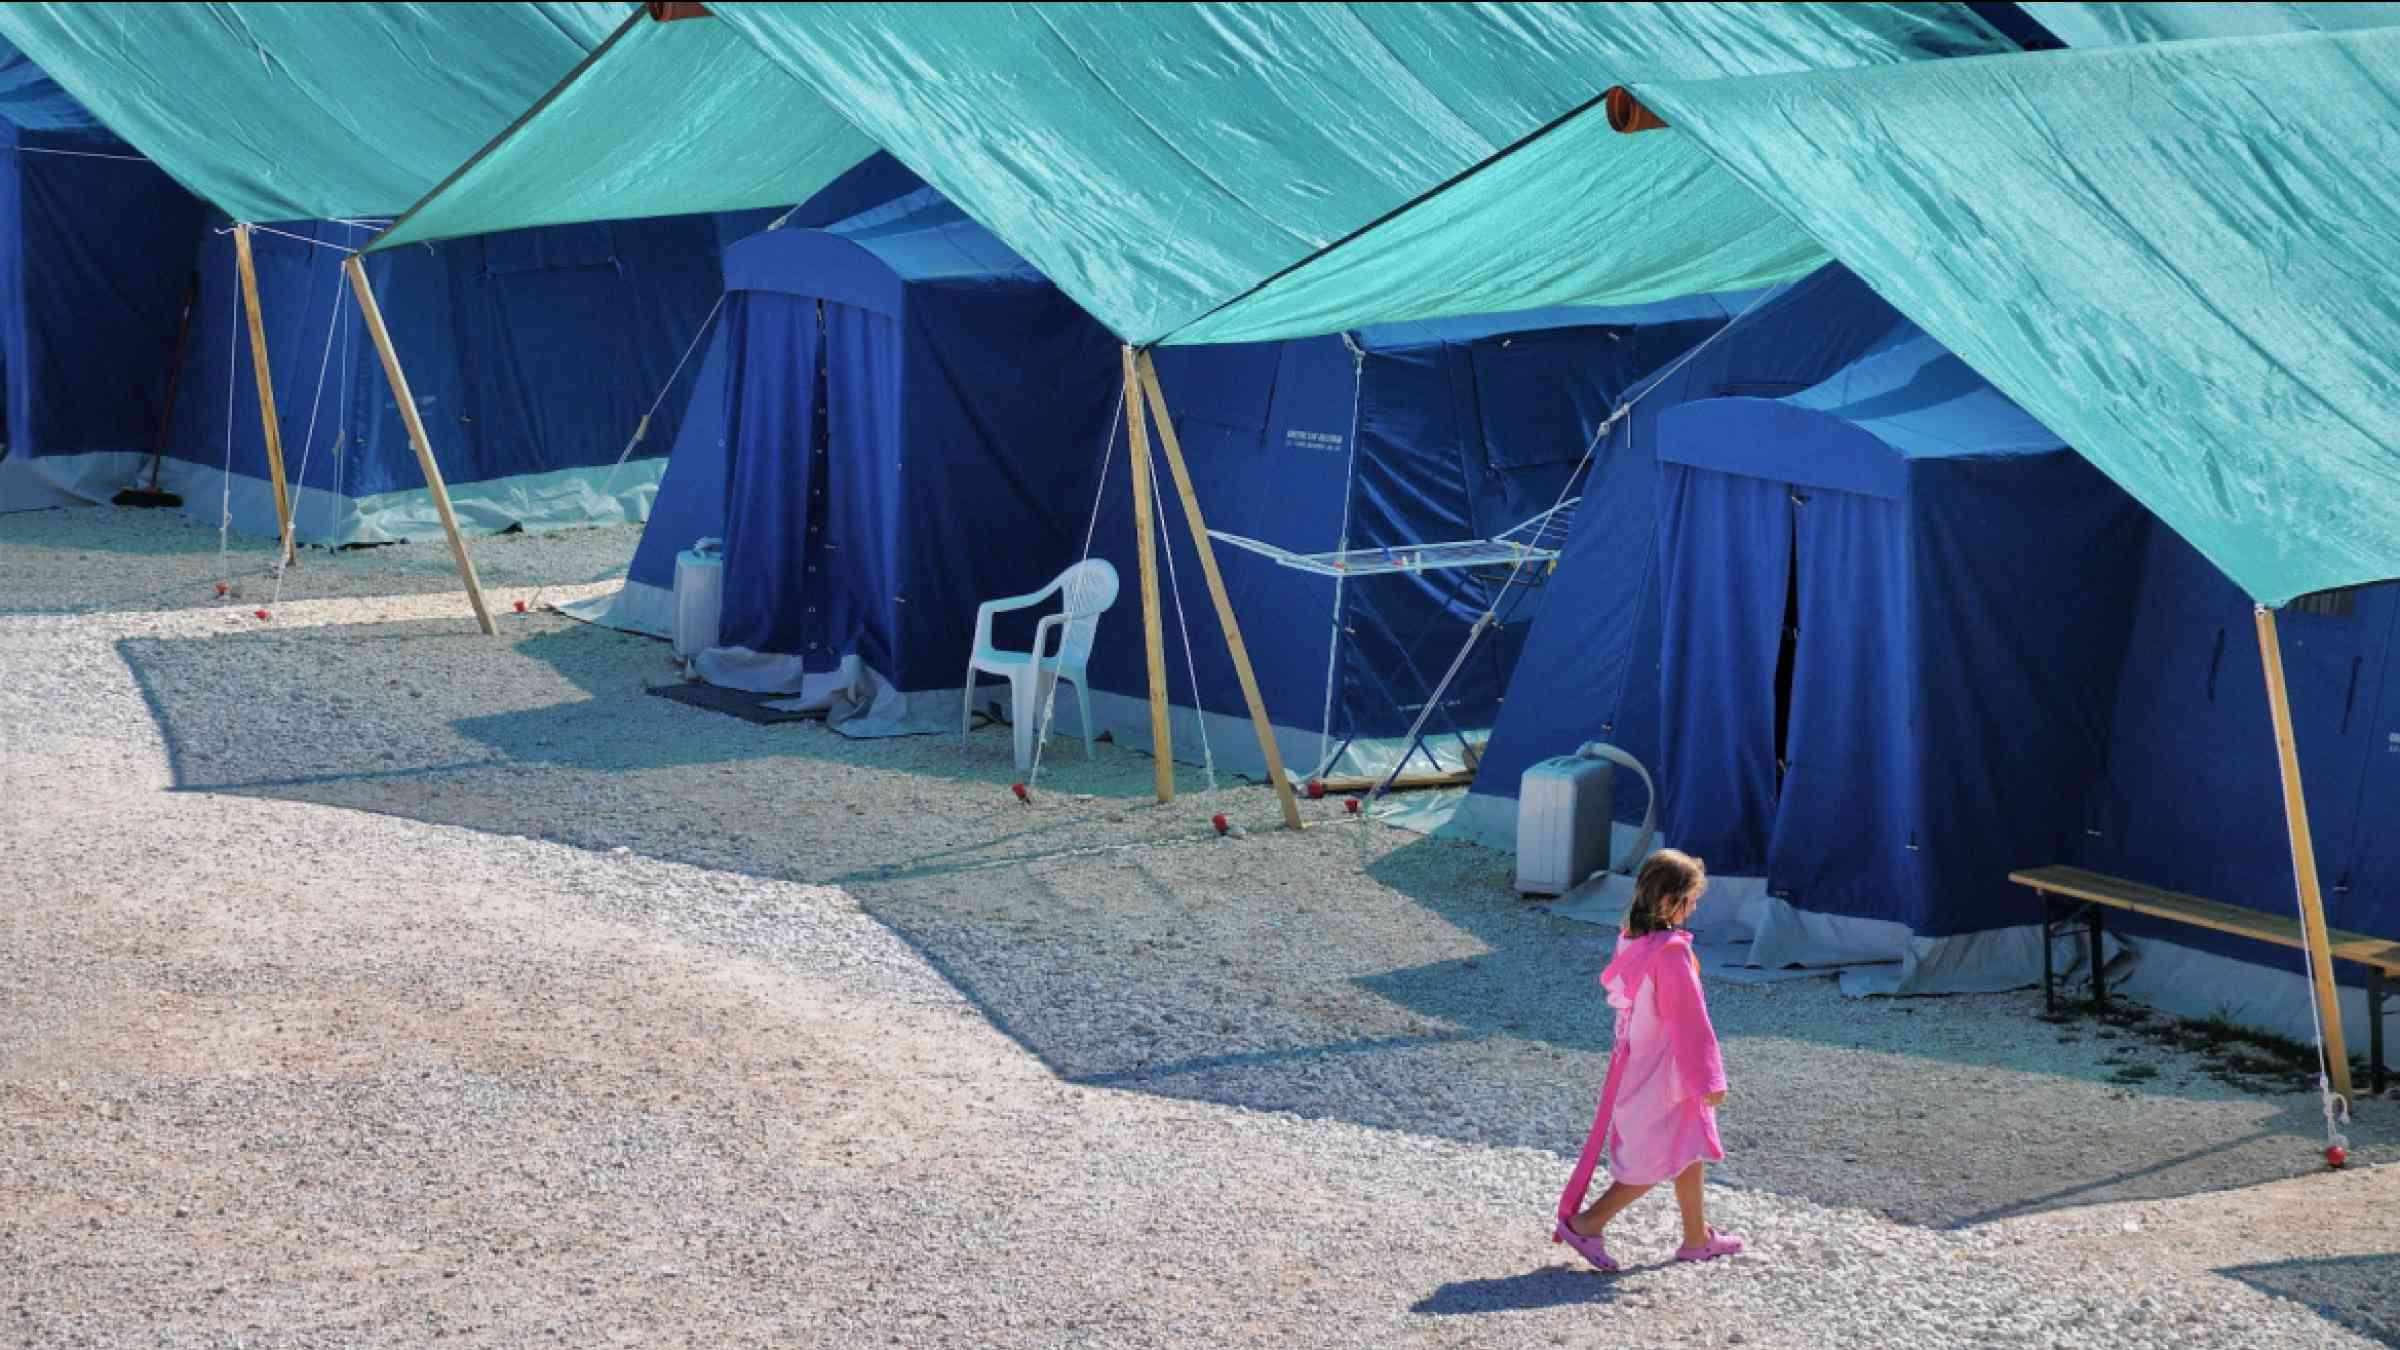 Earthquake refugees tent camp with a lonely child walking in Aquila Italy (August 2009)